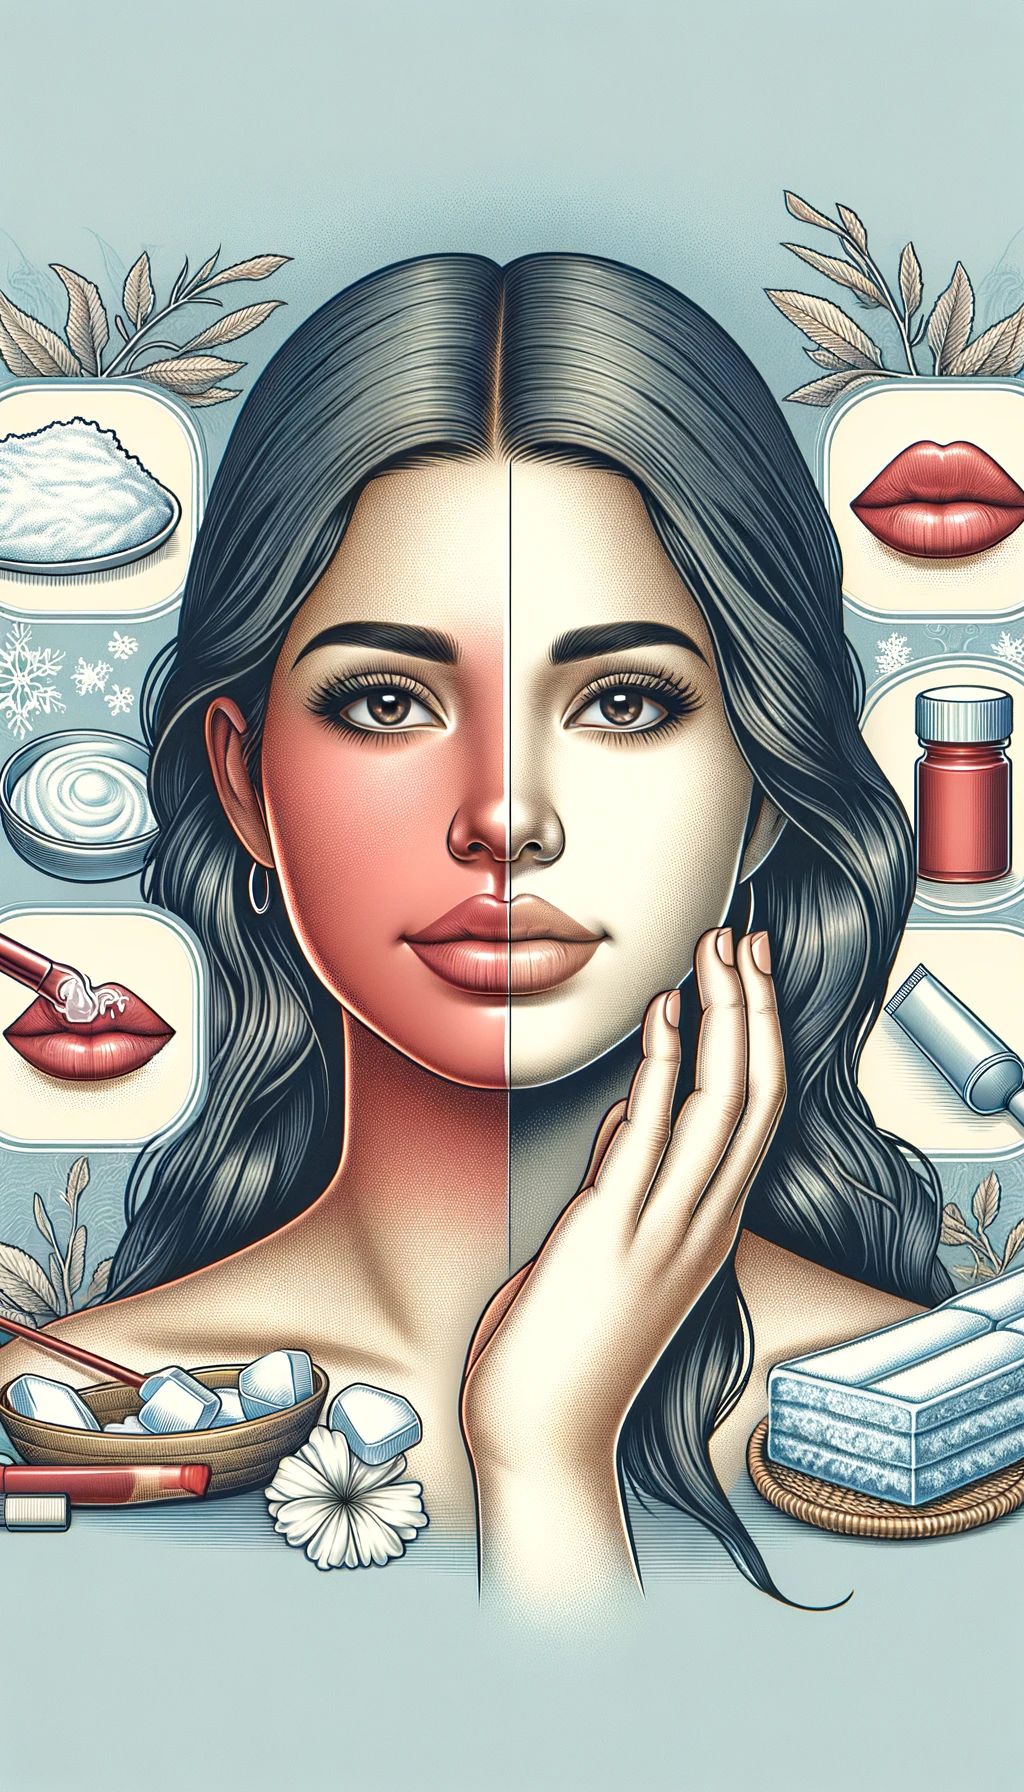 A detailed portrait representing Say Goodbye to Lip Blushing Pain with These 7 Effective Tips. The image features a woman of Mexican descent lookin